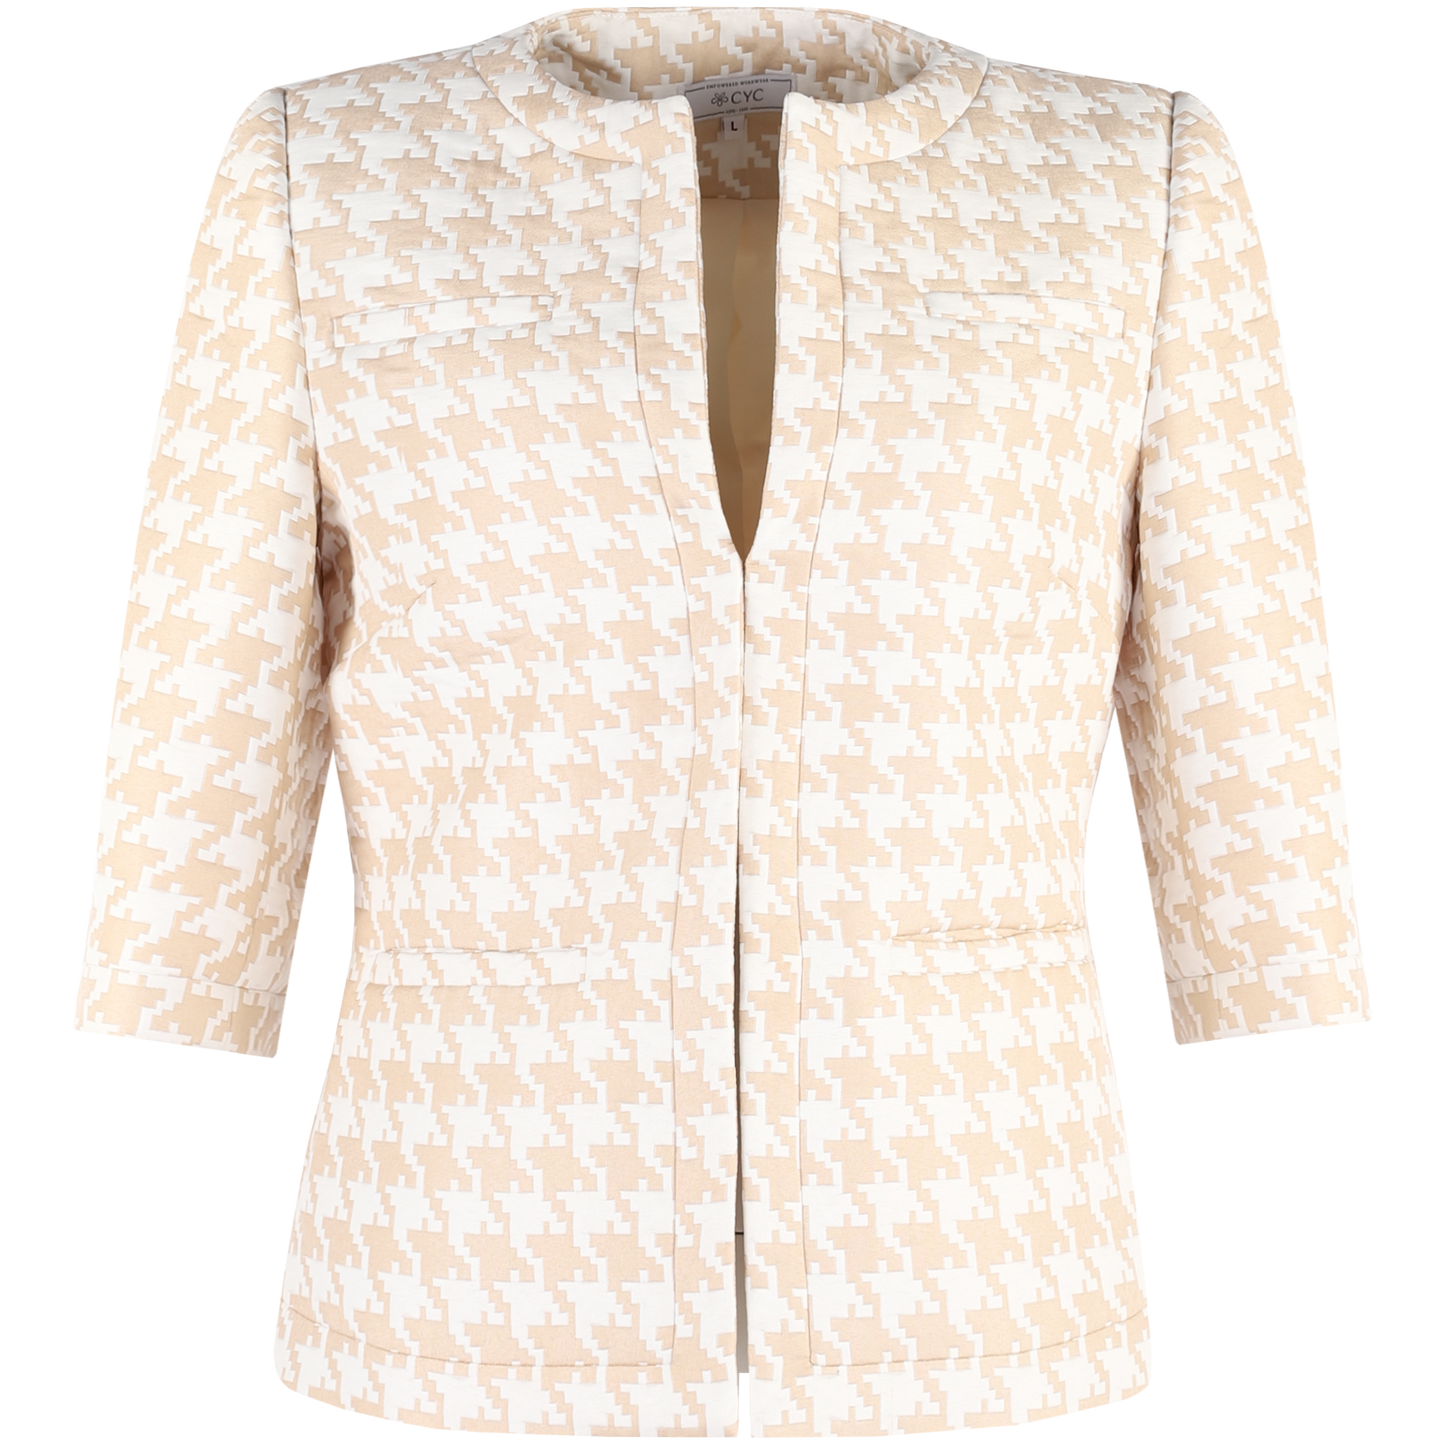 Beige Houndstooth Jacket for Female Frontline Associate — Uniforms by CYC Corporate Label